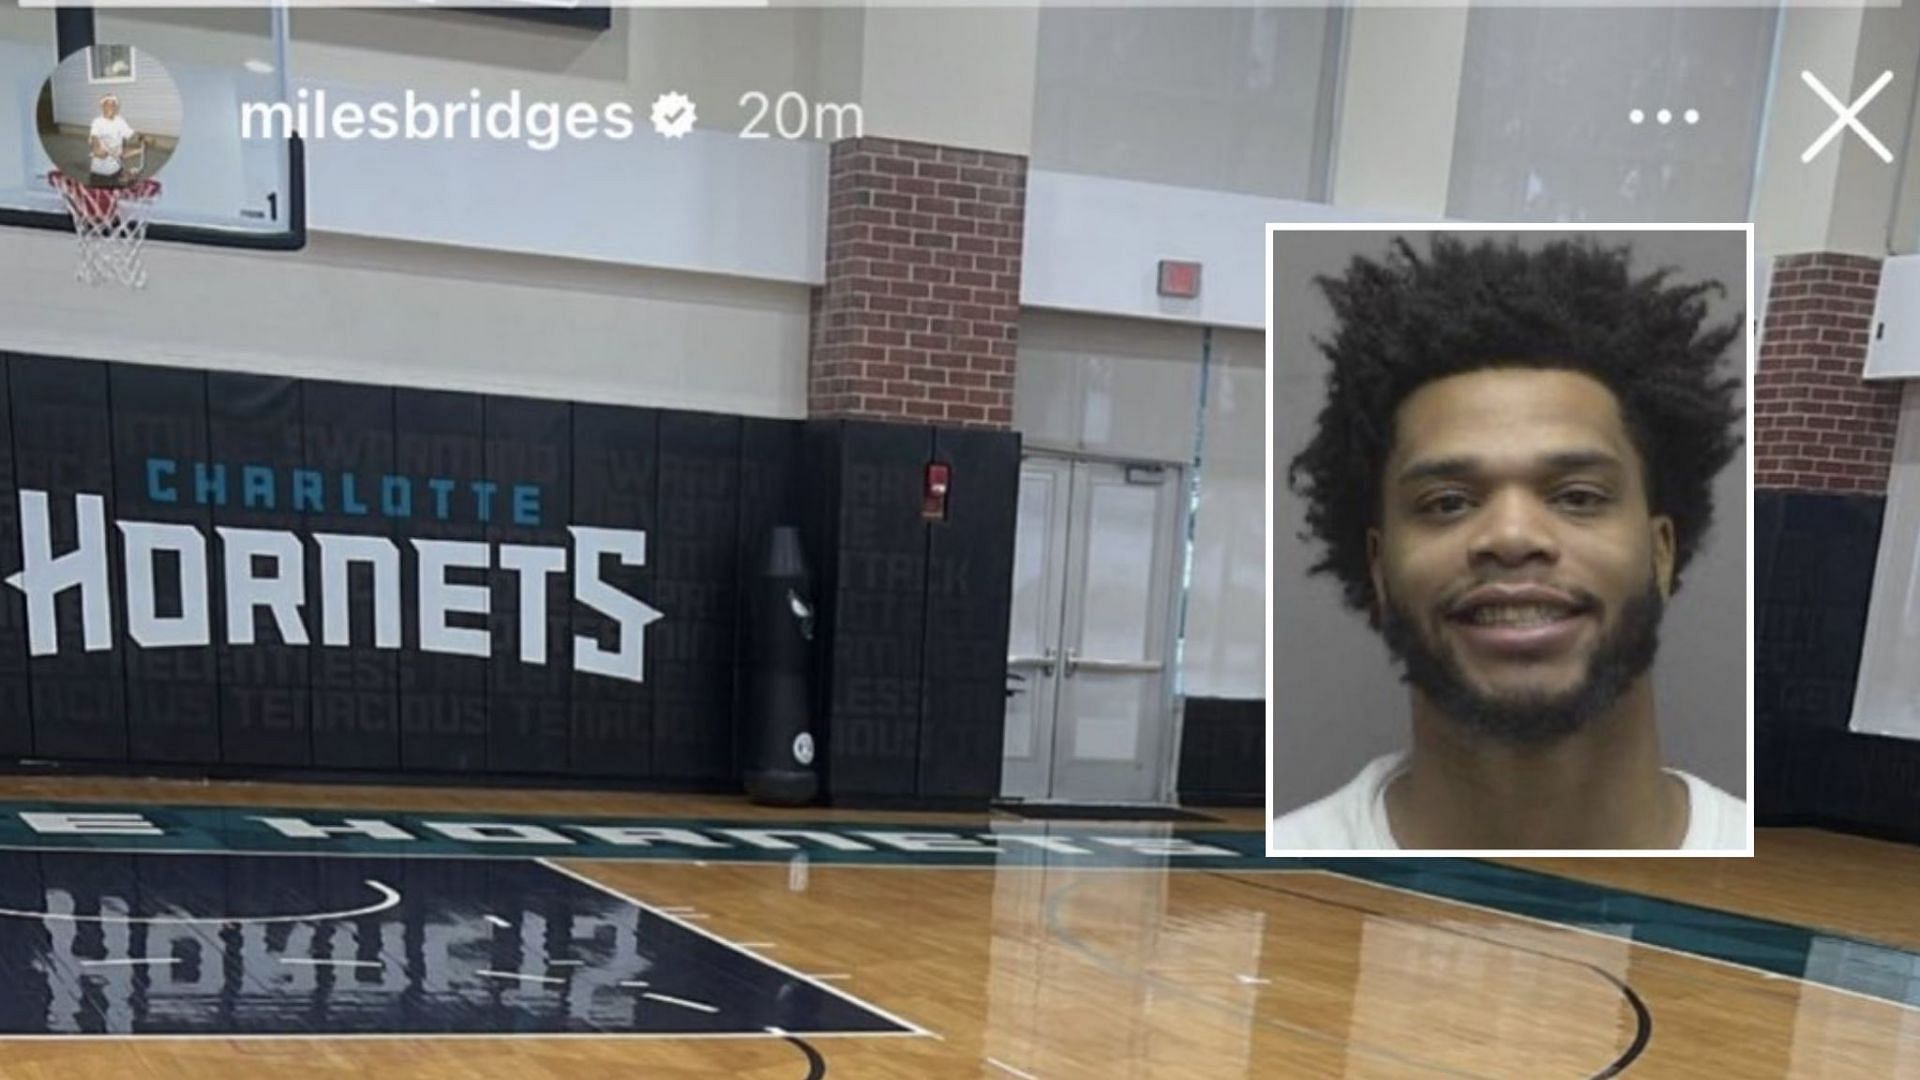 Fans are fuming at Miles Bridges